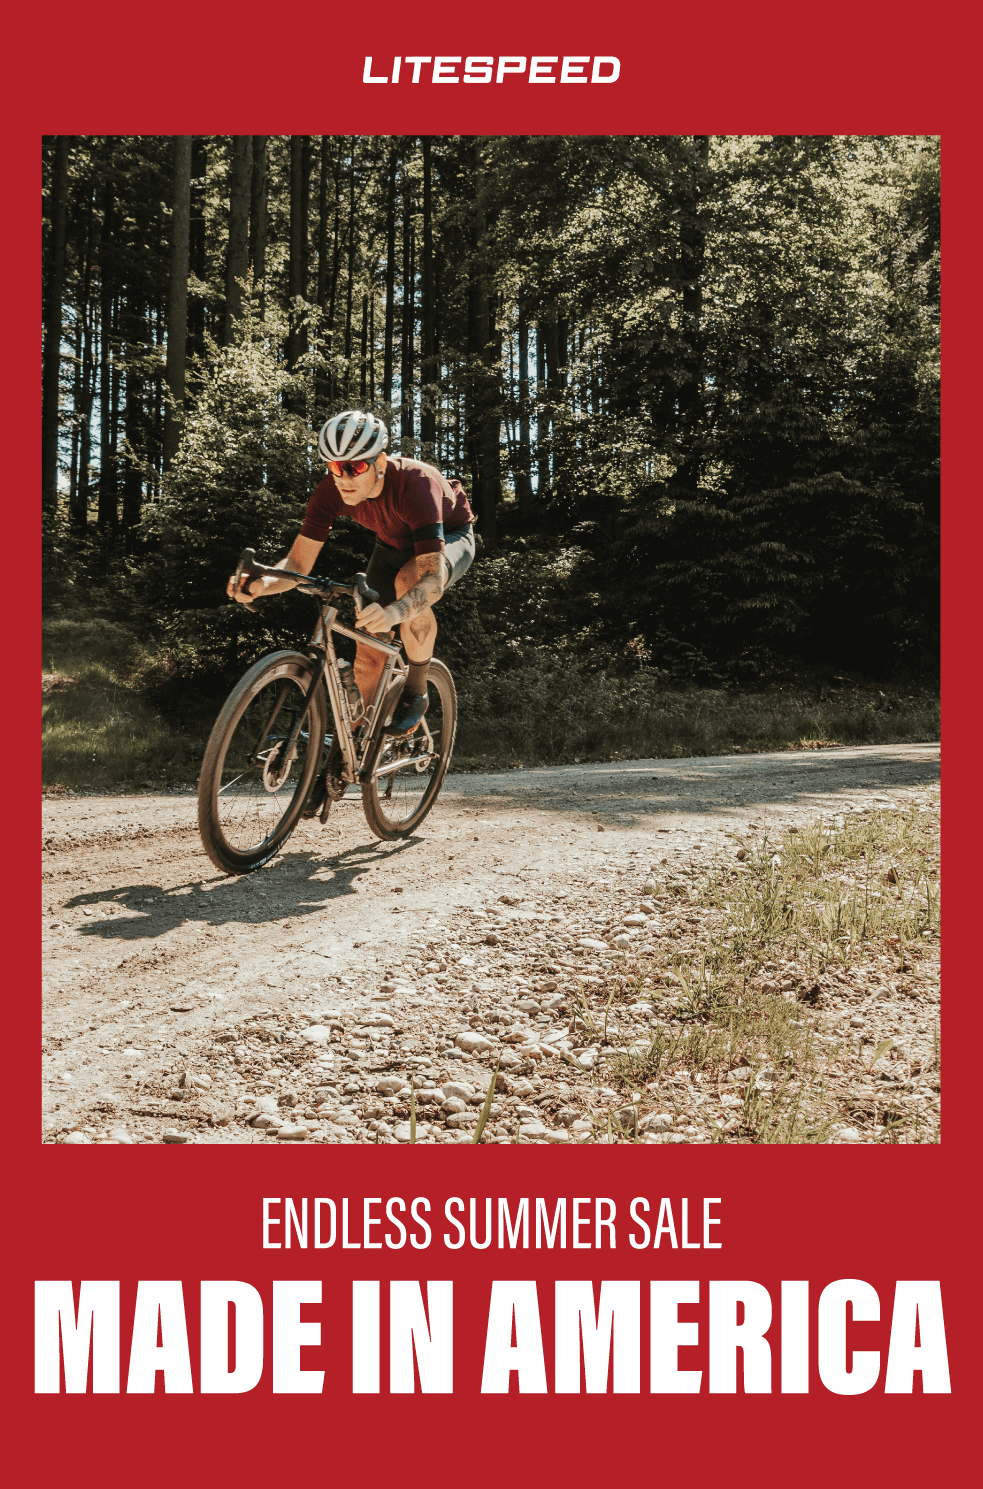 The Litespeed Endless Summer Sale starts now. Shop made-in-the-USA titanium bikes on sale now.